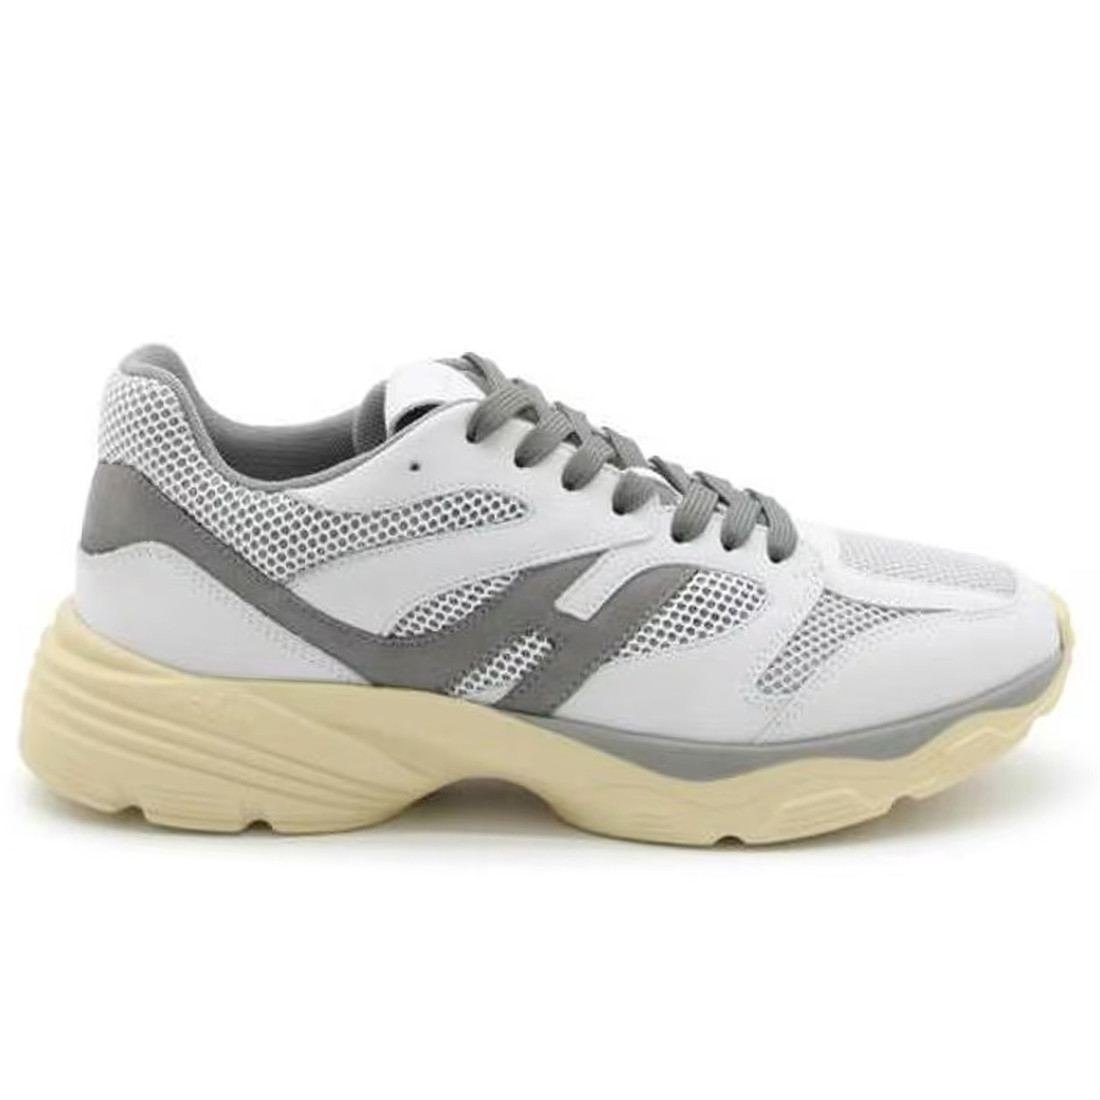 Hogan H665 white and gray men's sneaker in leather and fabric